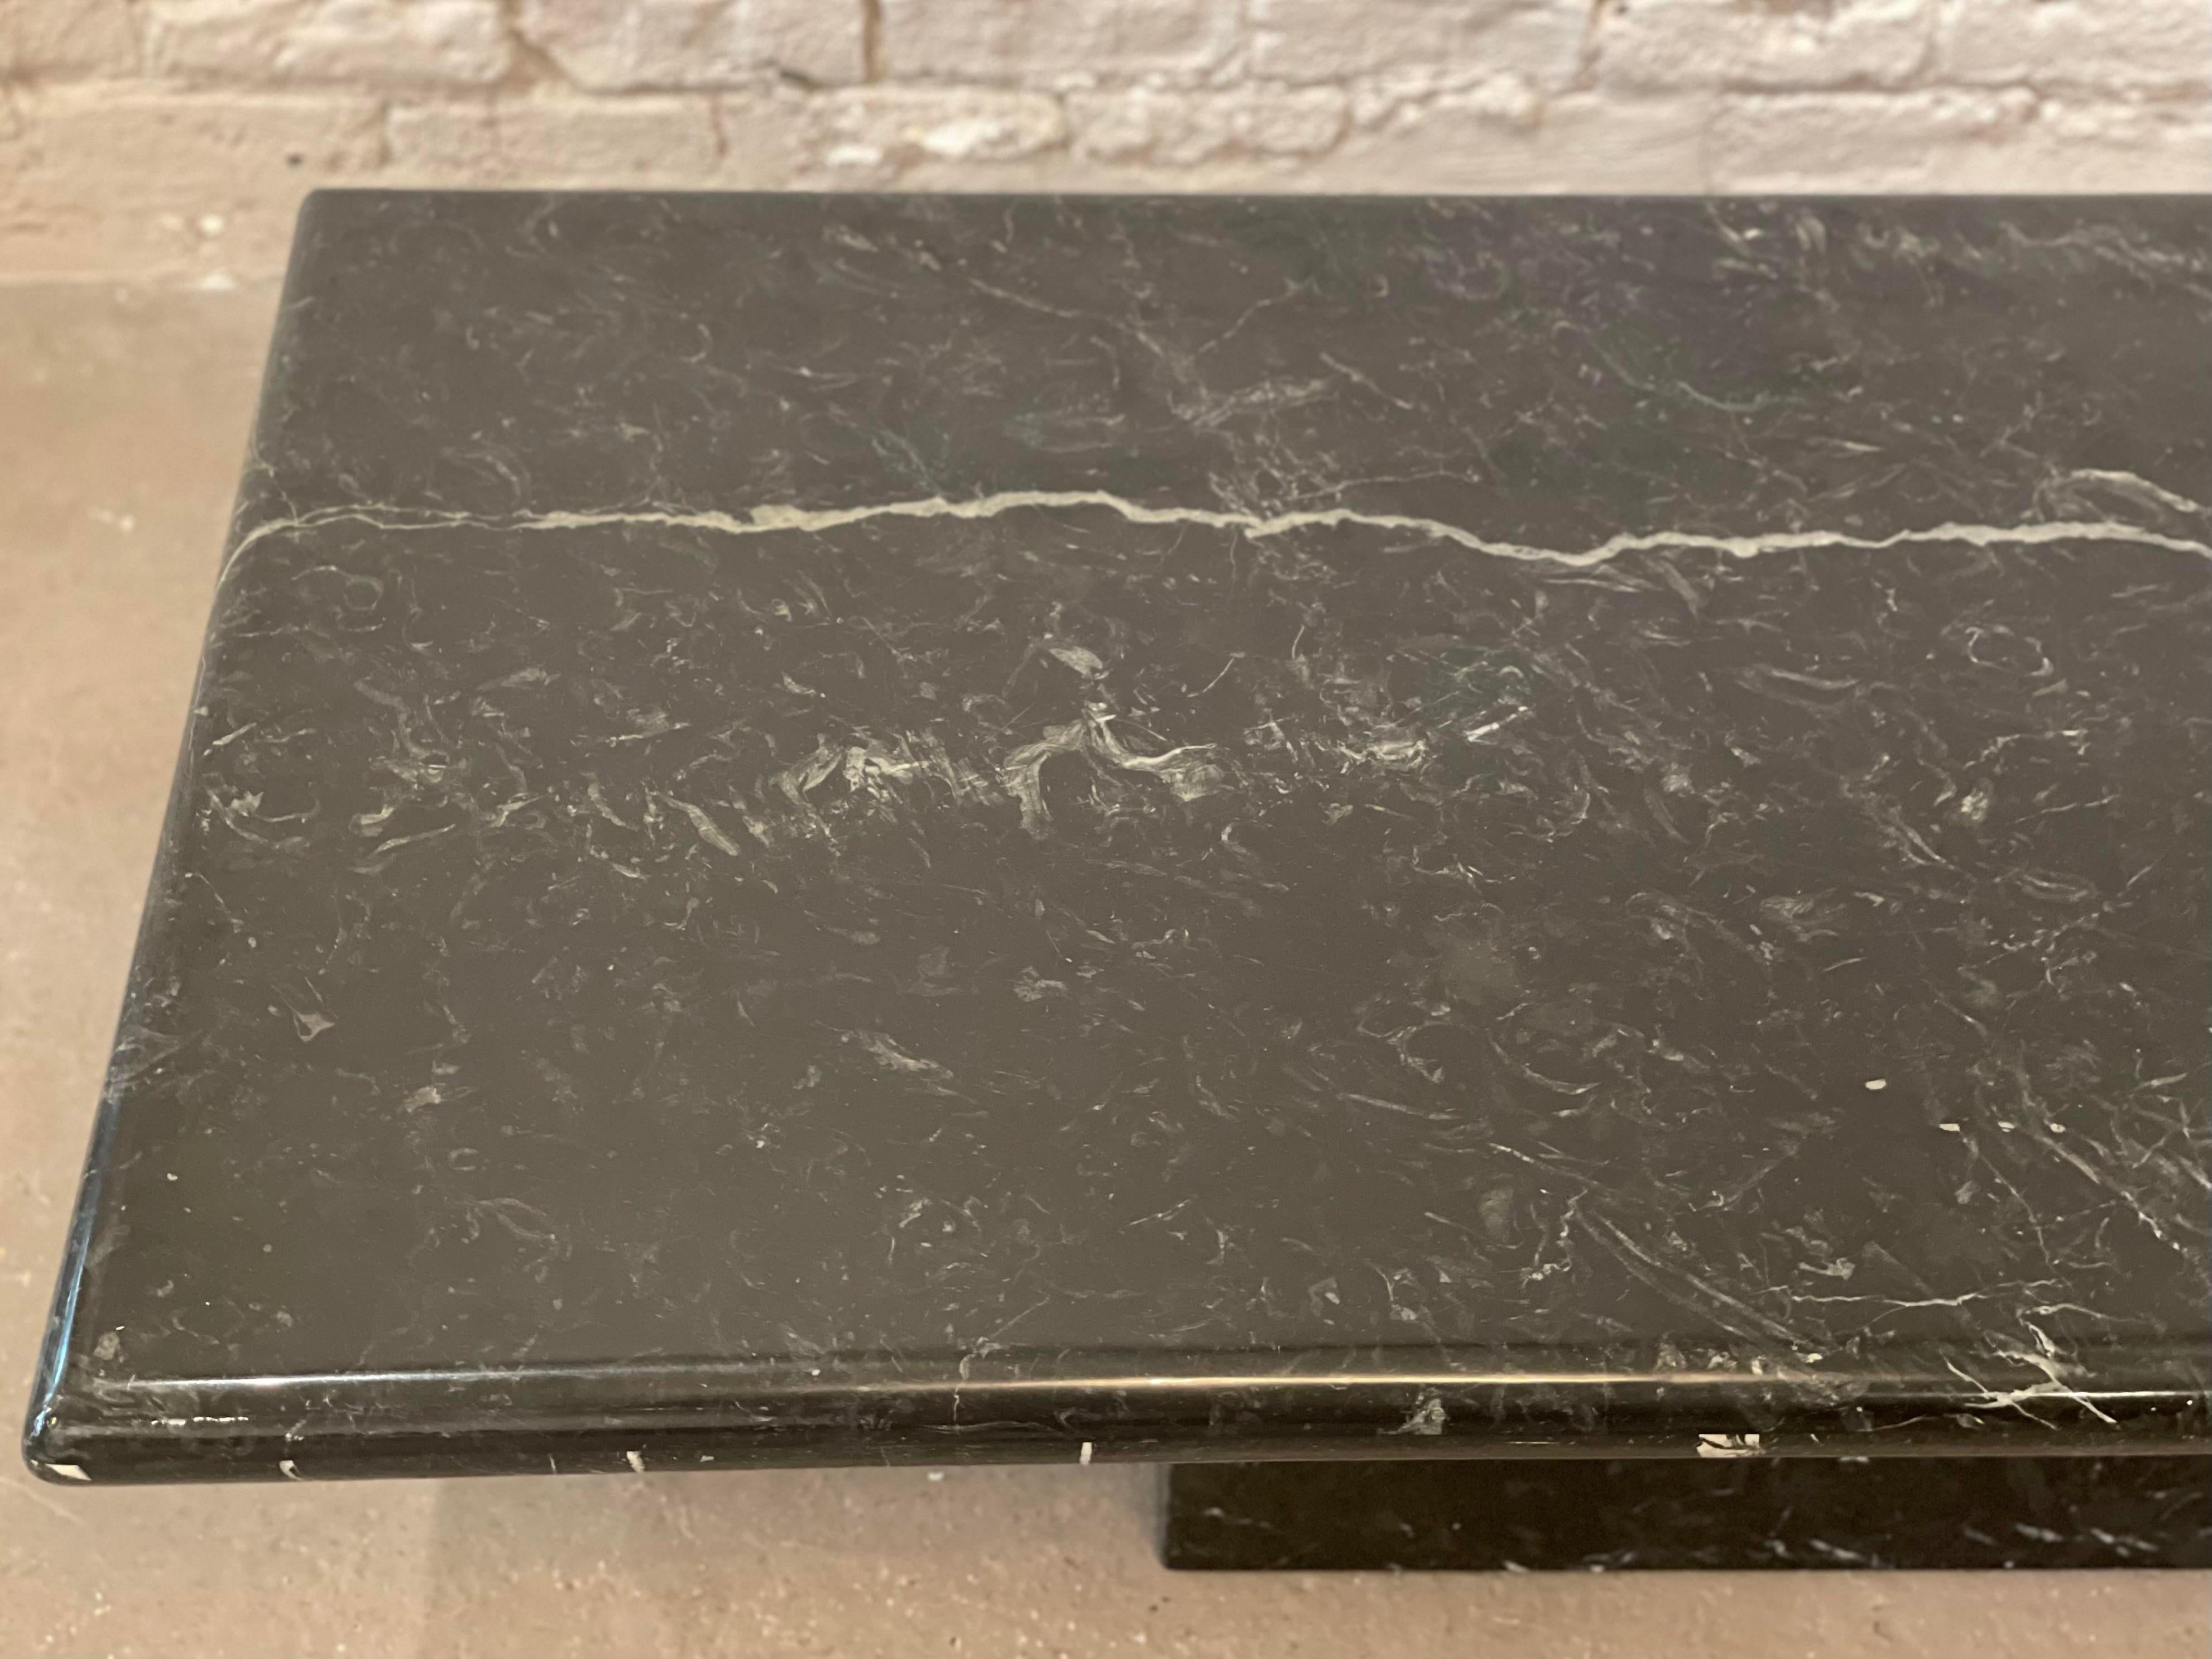 Beautiful slab of Nero Marquina, it’s almost all black with one corner covered in ivory veining. The original lacquer is in excellent condition. The table top is attached to the base making this kid friendly as well.